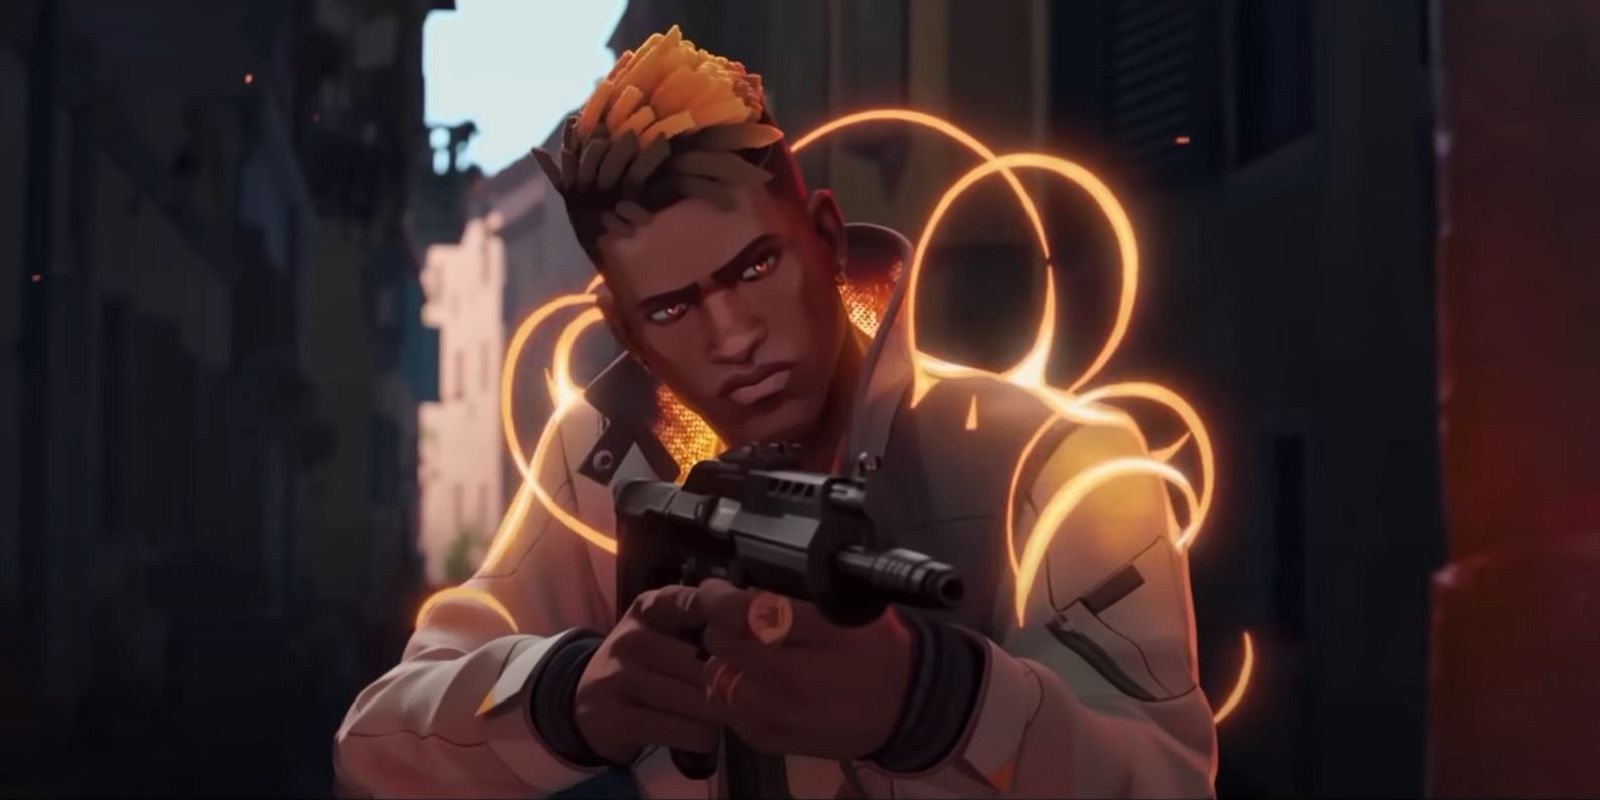 Phoenix Holding A Vandal Rifle While He Is Surrounded By A Fiery Glow